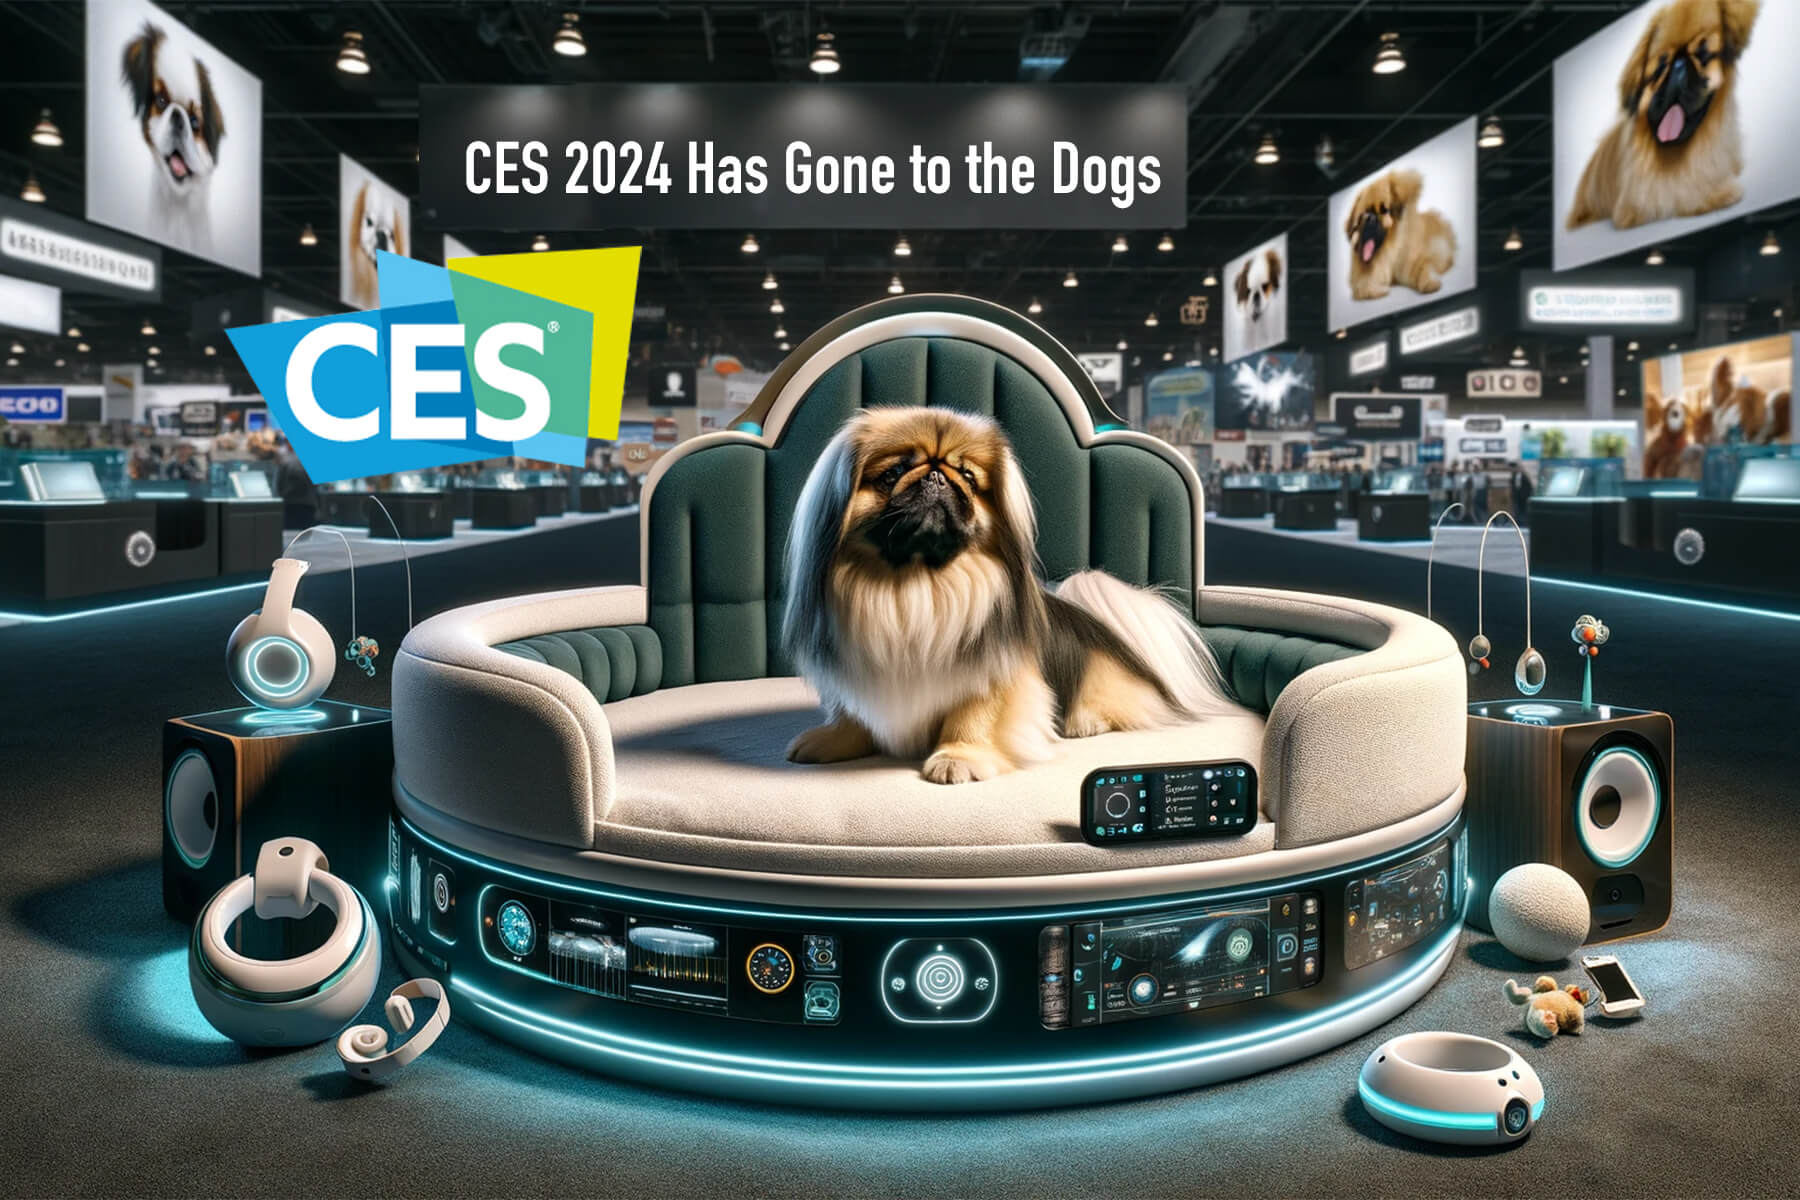 CES 2024 Has Gone to the Dogs